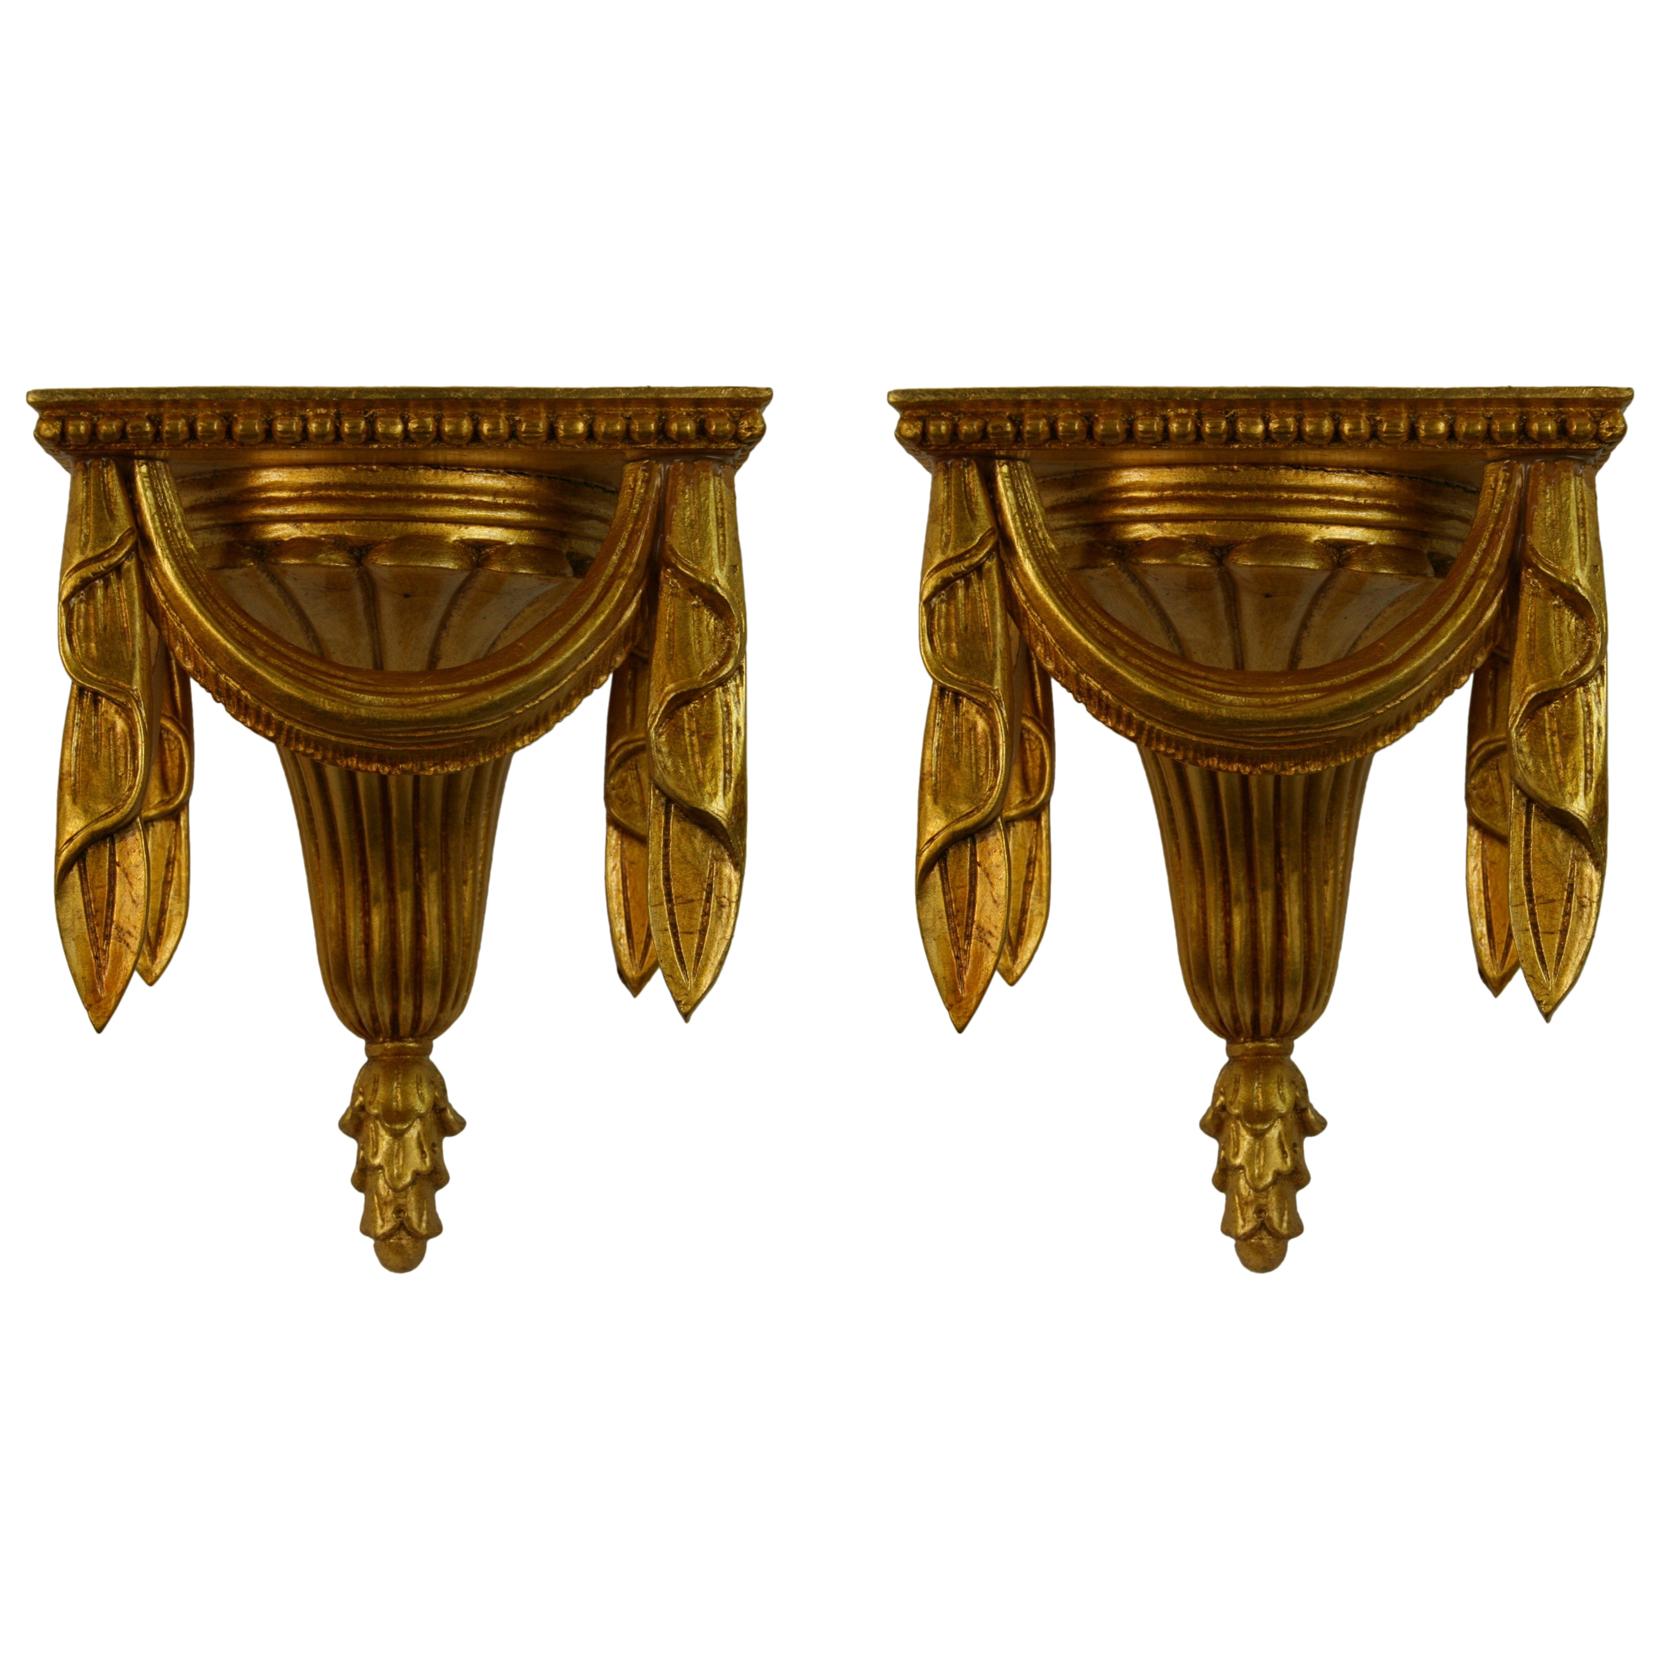 Pair of French Giltwood Neoclassical Style Wall Shelves/ Brackets